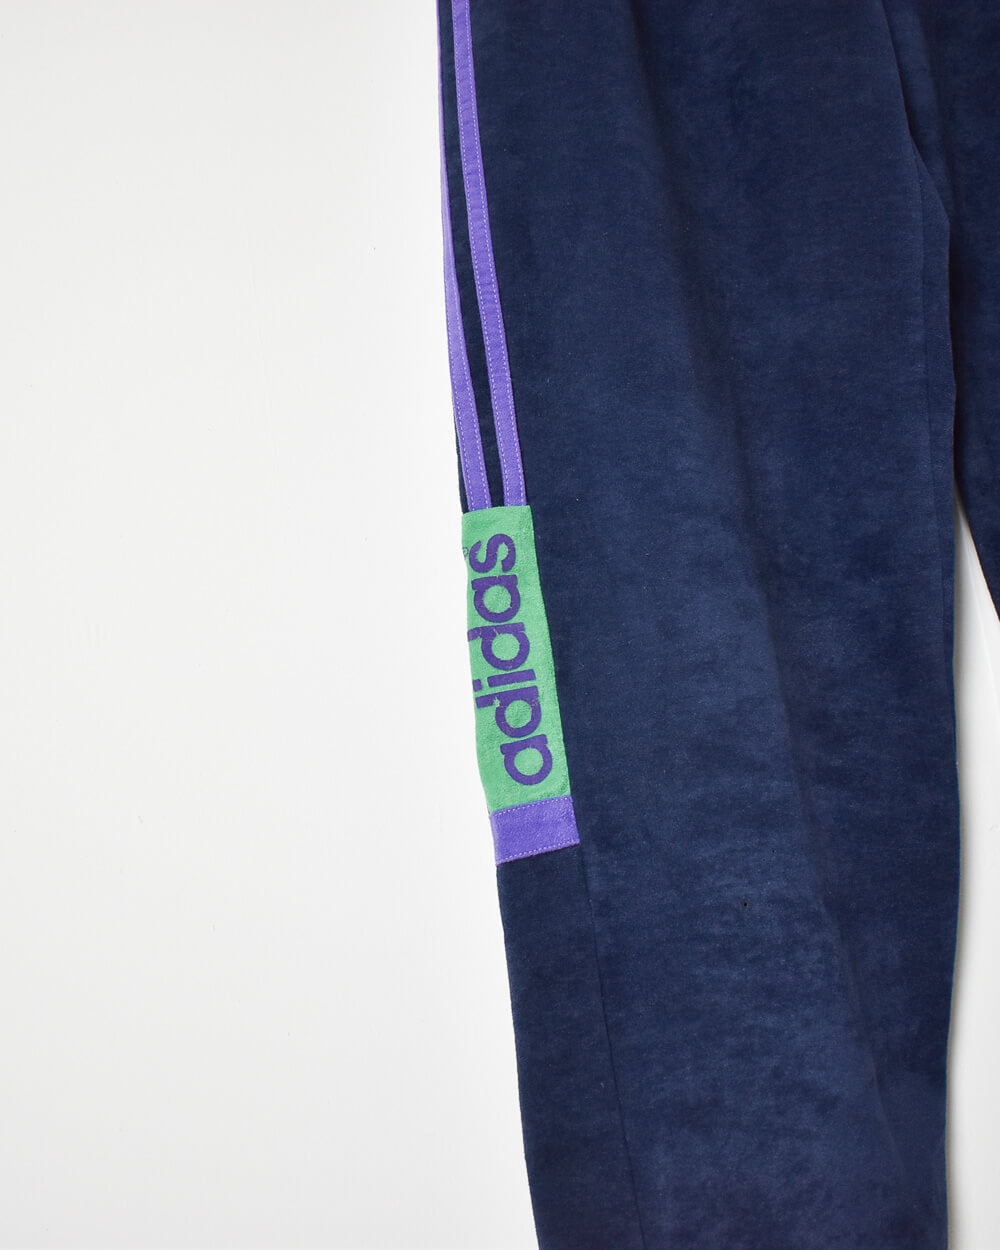 Navy Adidas Velour Tracksuit Bottoms - W38 L30